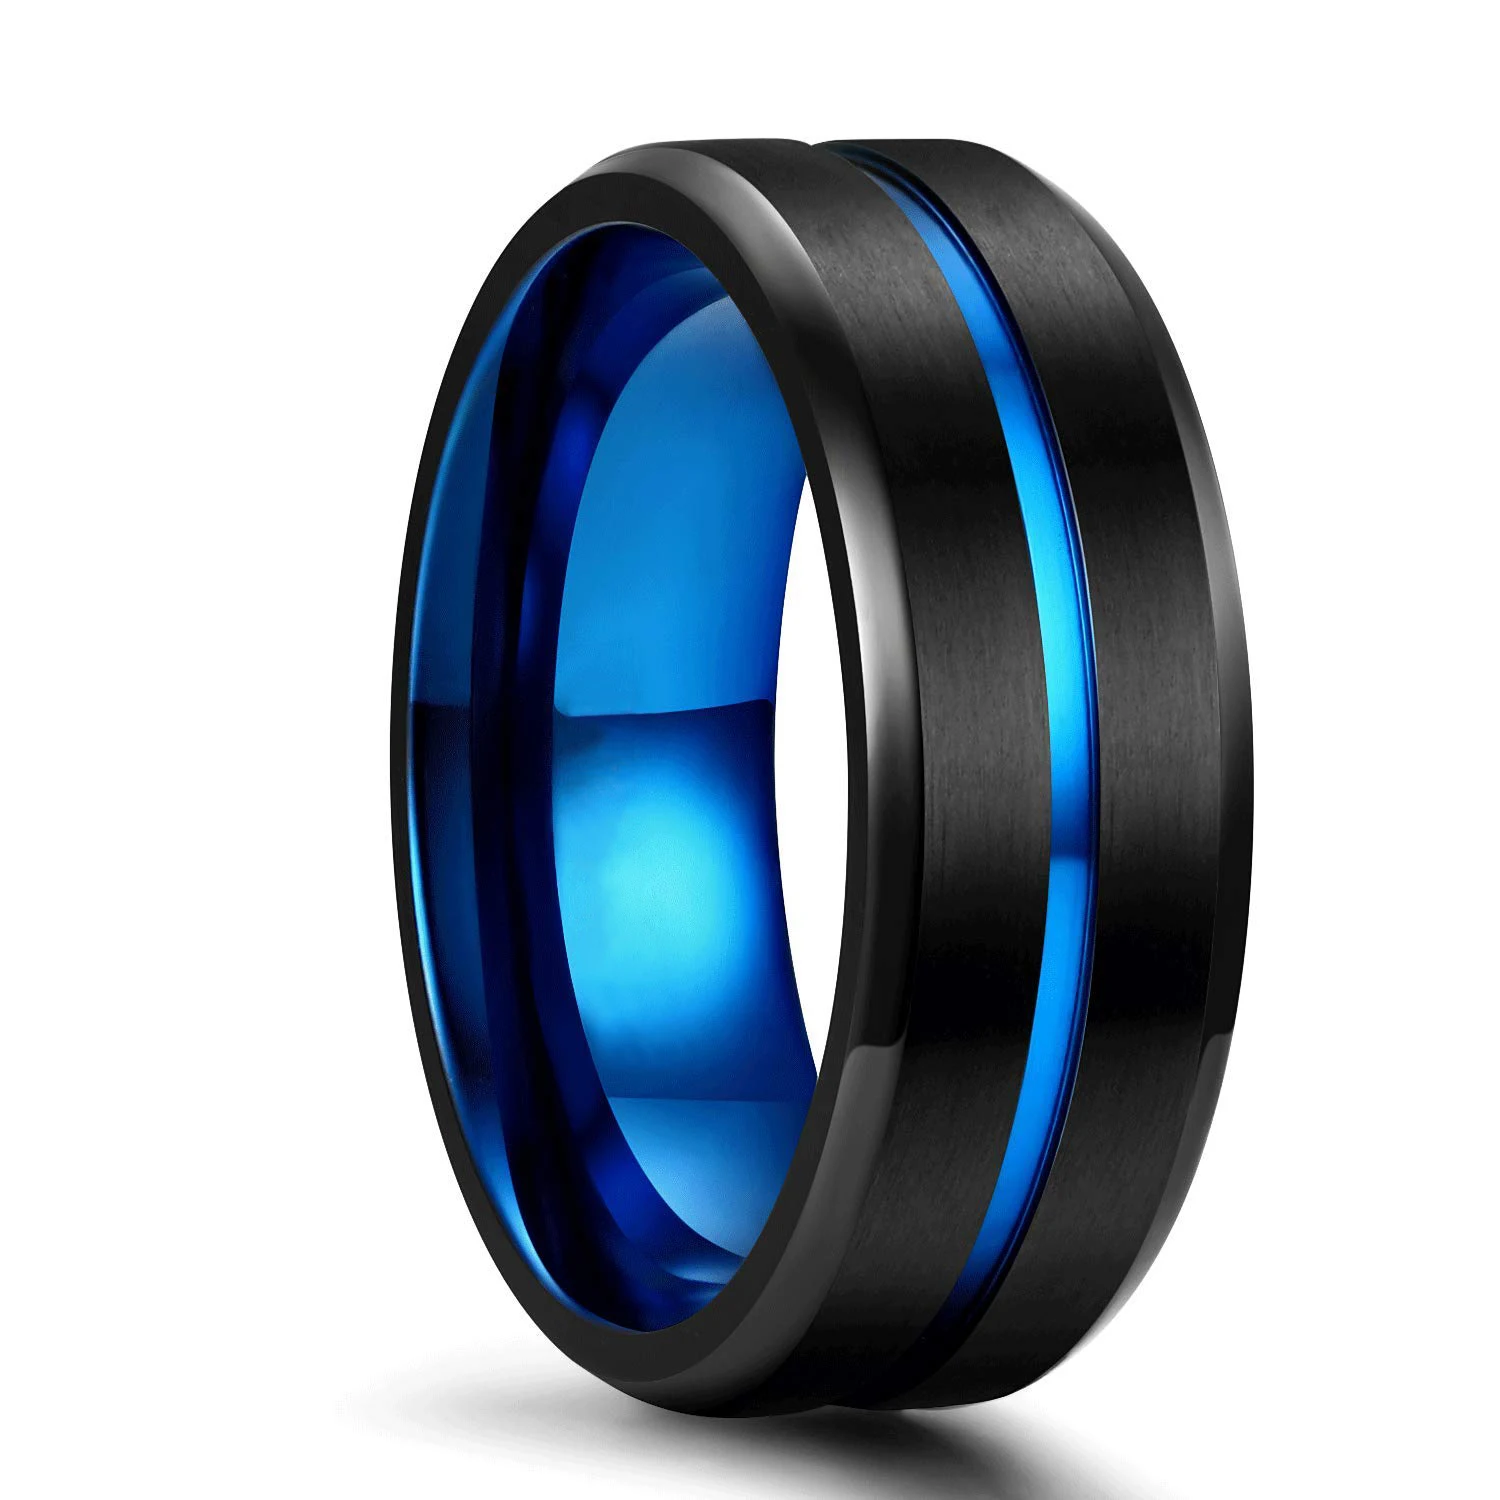 

Fashion 8mm Men's Black Tungsten Wedding Band Rings Blue Groove Beveled Edge Engagement Ring Men’s Valentine Gift Free Shipping